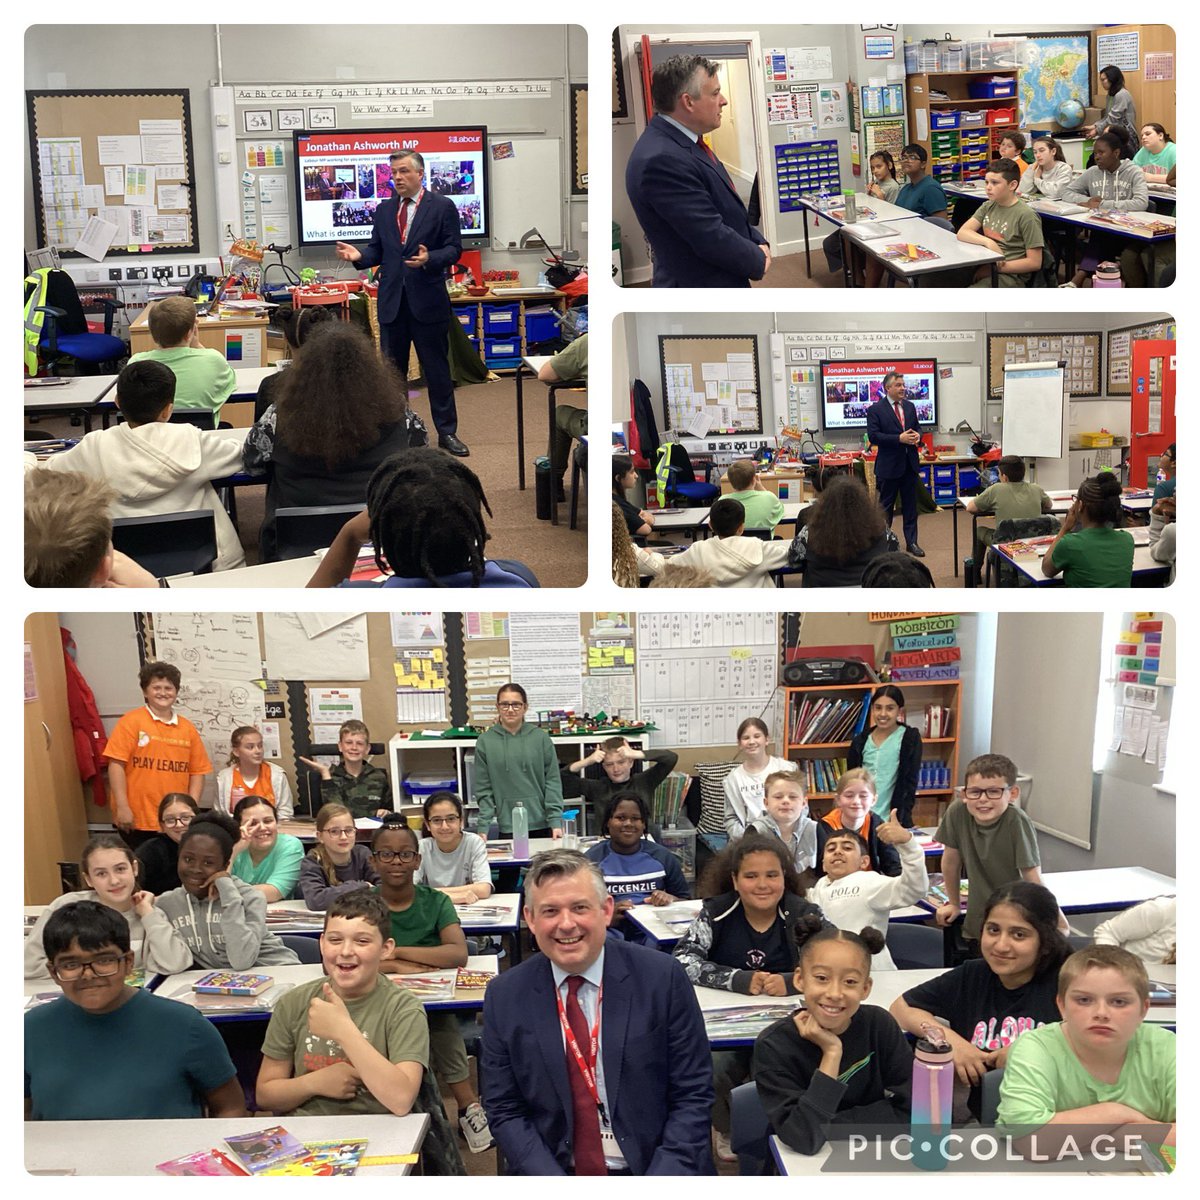 As part of the Year 6 transition programme we are learning about democracy. #SheridanClass have been visited by MP @JonAshworth who has discussed what the role of parliament and an MP are in British democracy. The class took part in a vote. #KnMPAPSHE #KnMPAEnrichment